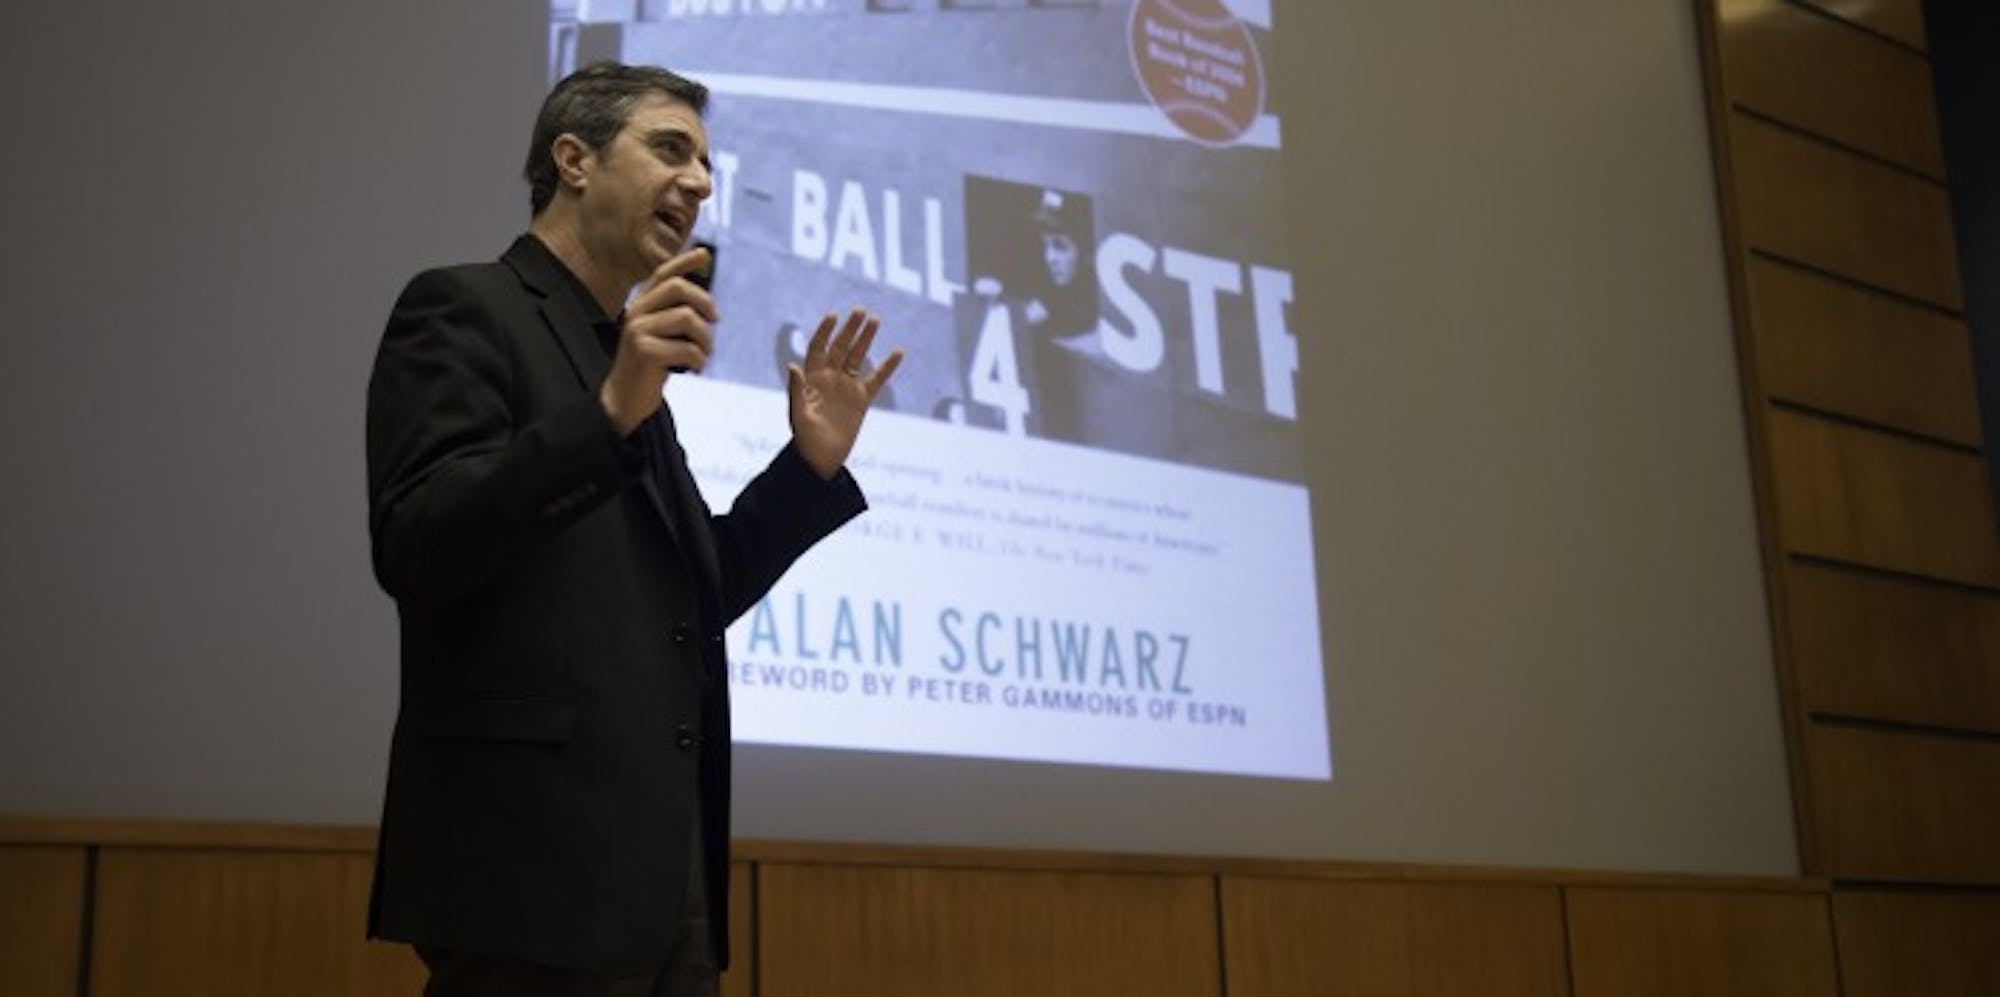 Allan Schwarz, the journalist who broke the story on the football-concussion connection, speaks at Notre Dame on Wednesday.